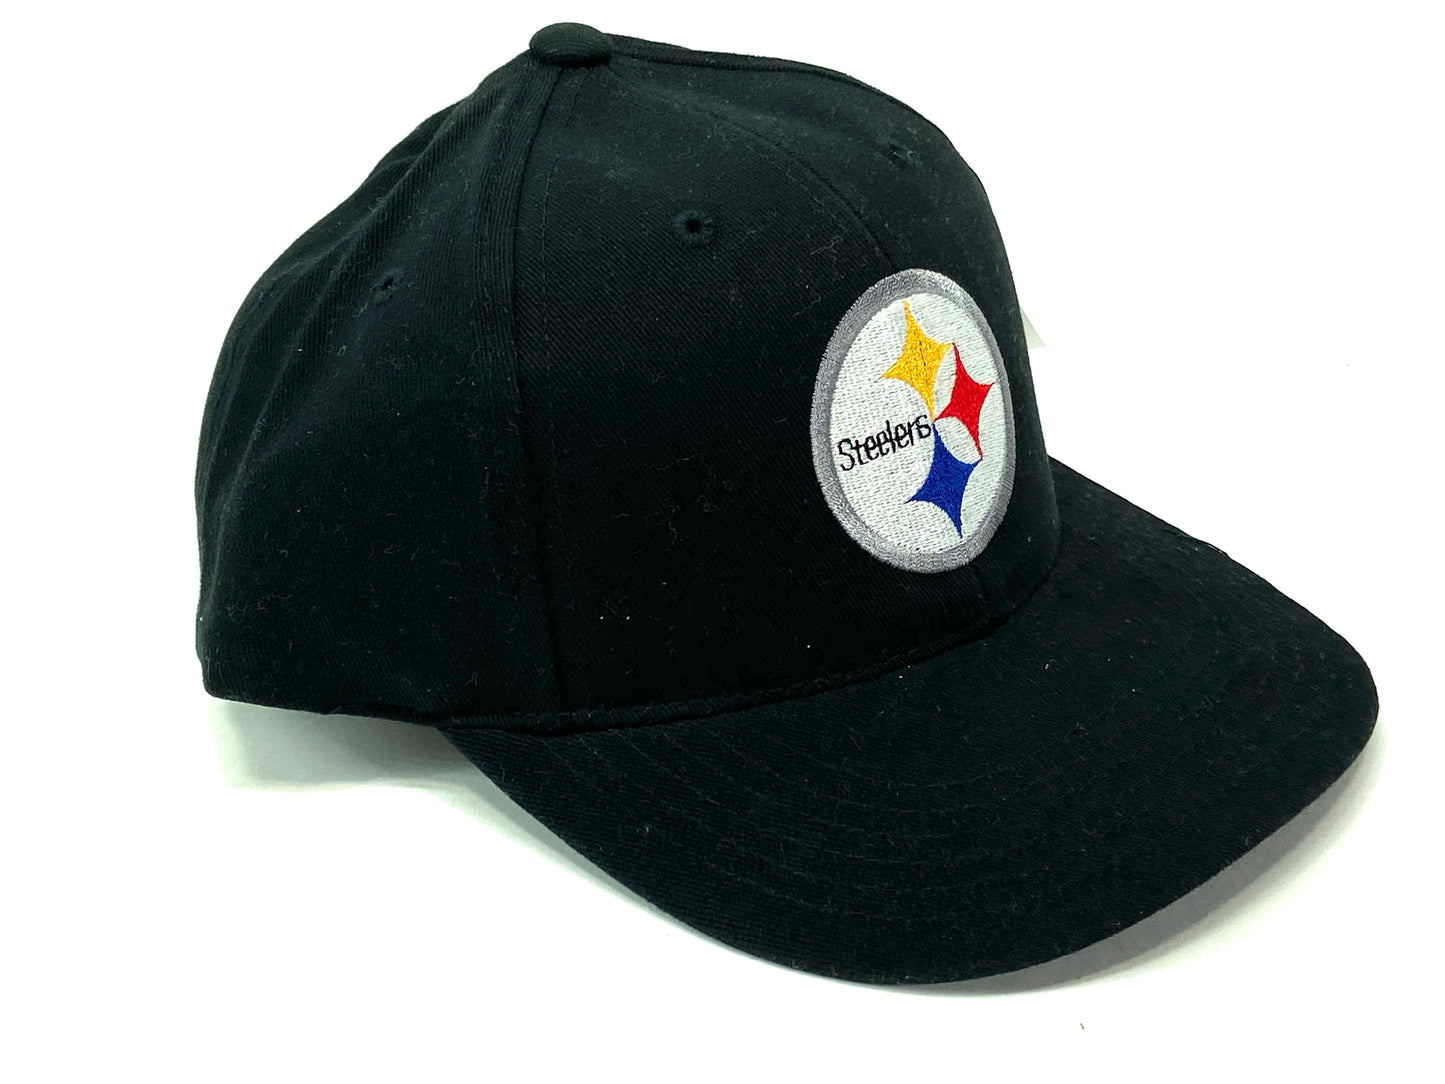 Pittsburgh Steelers Vintage NFL Juvenile Replica Snapback NOS By Annco